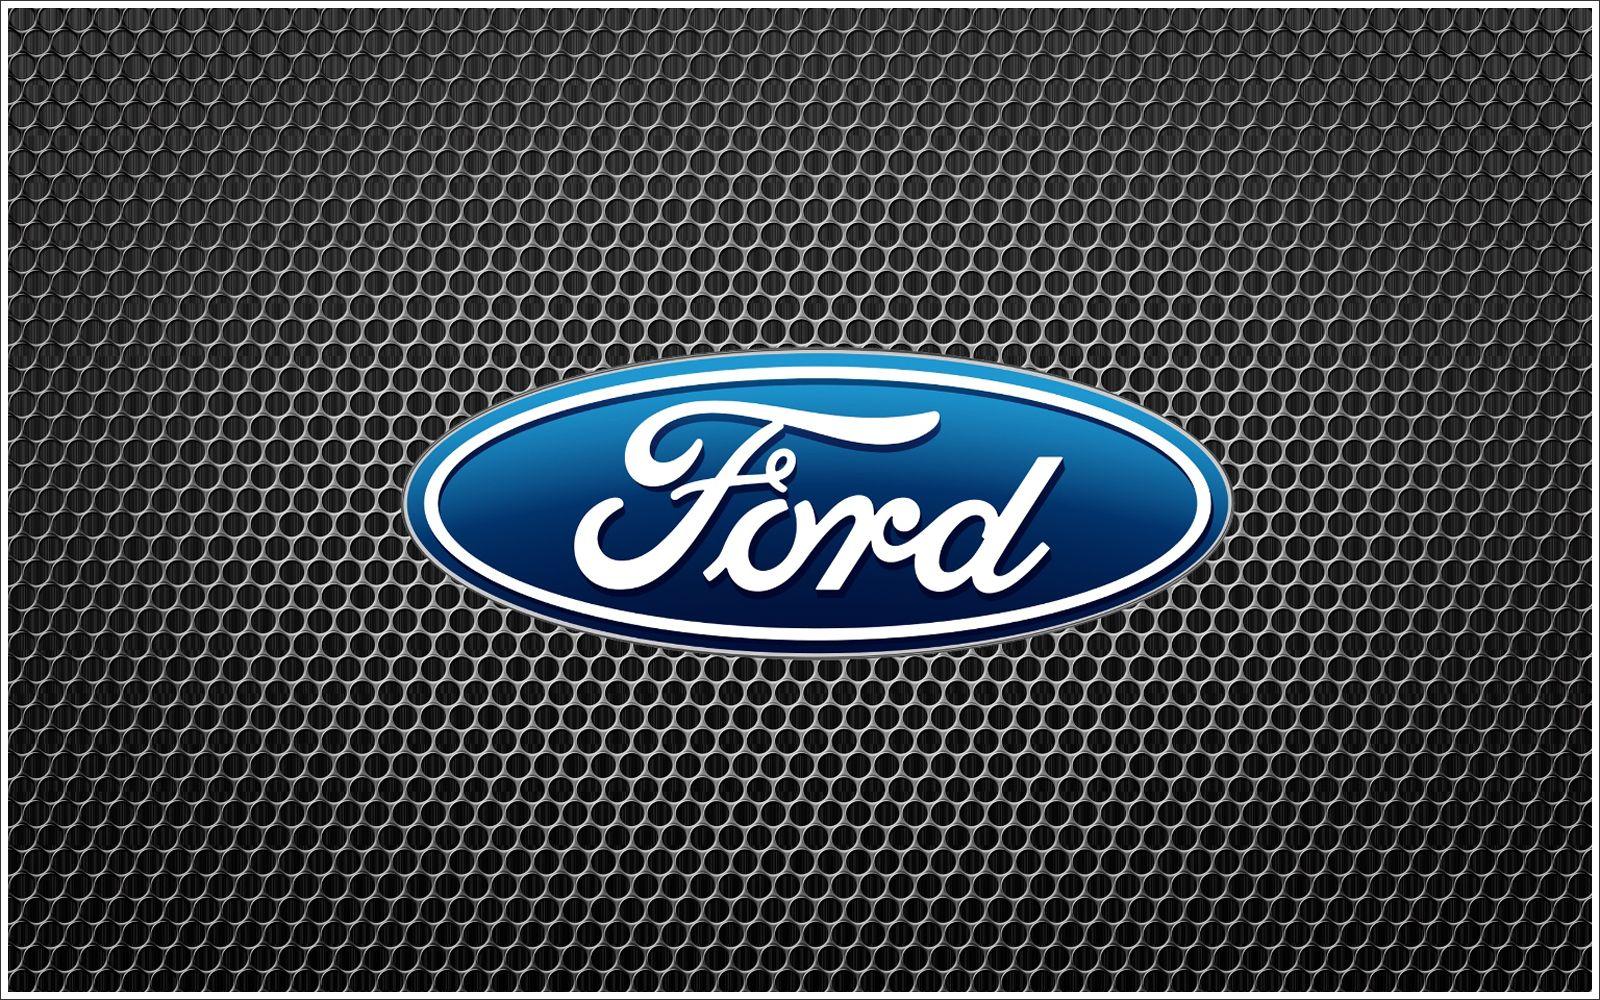 Ford Oval Logo - Ford Logo Meaning and History, latest models. World Cars Brands